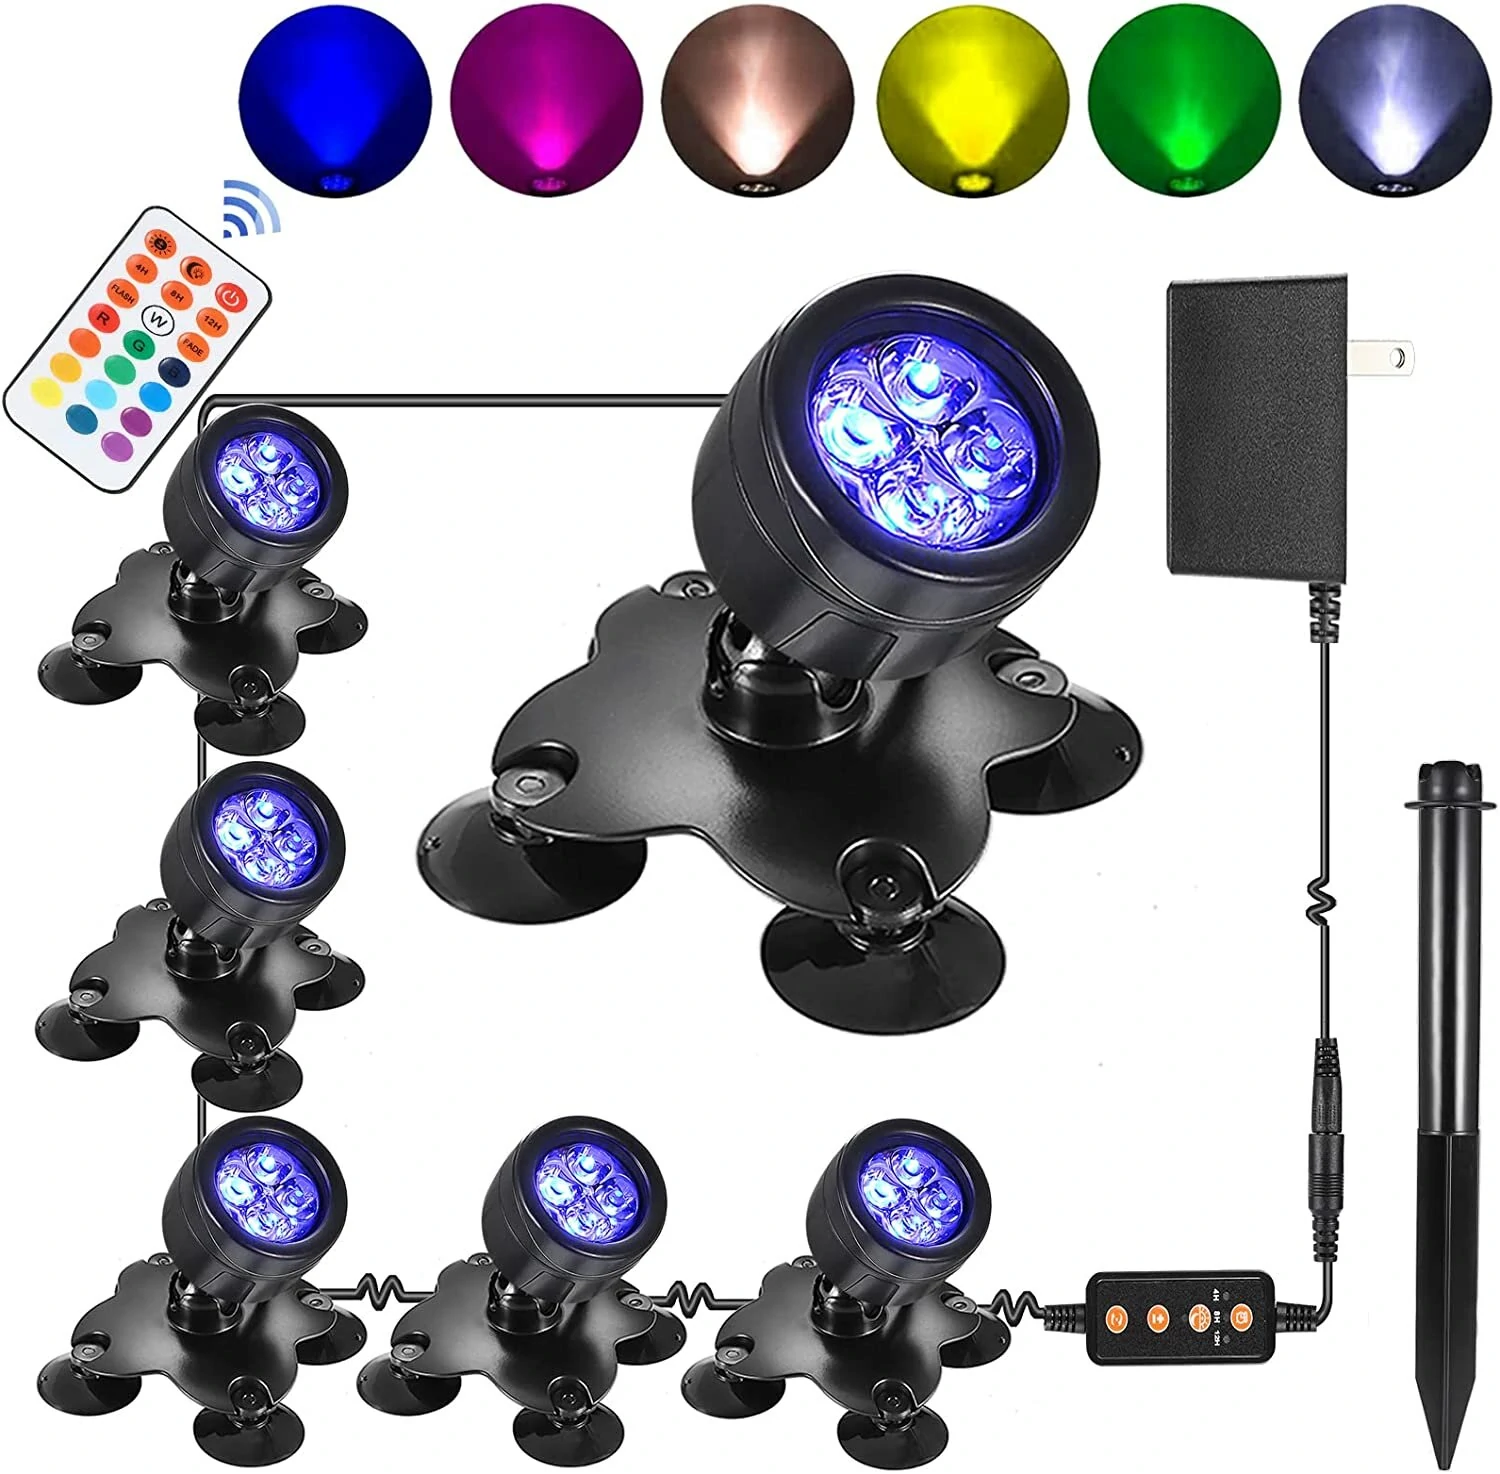 LED Pond Lights Led Underwater Fountain Submersible, Outdoor Indoor IP68 Waterproof Landscape Spotlights, 4 Bright LED with 13 Colors for Tree, Flag, Yard, Lawn, Pond – EU Plug